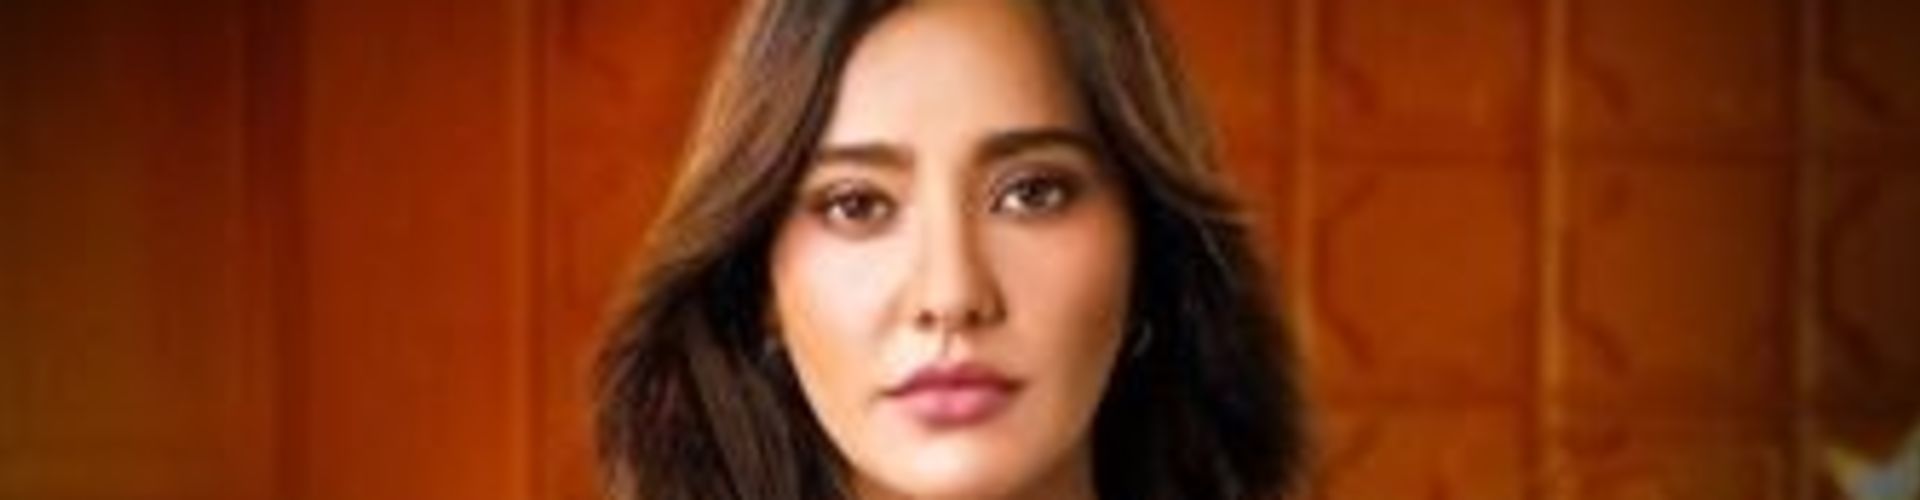 Illegal Season 2 Will Be Thrilling To Watch Says Neha Sharma